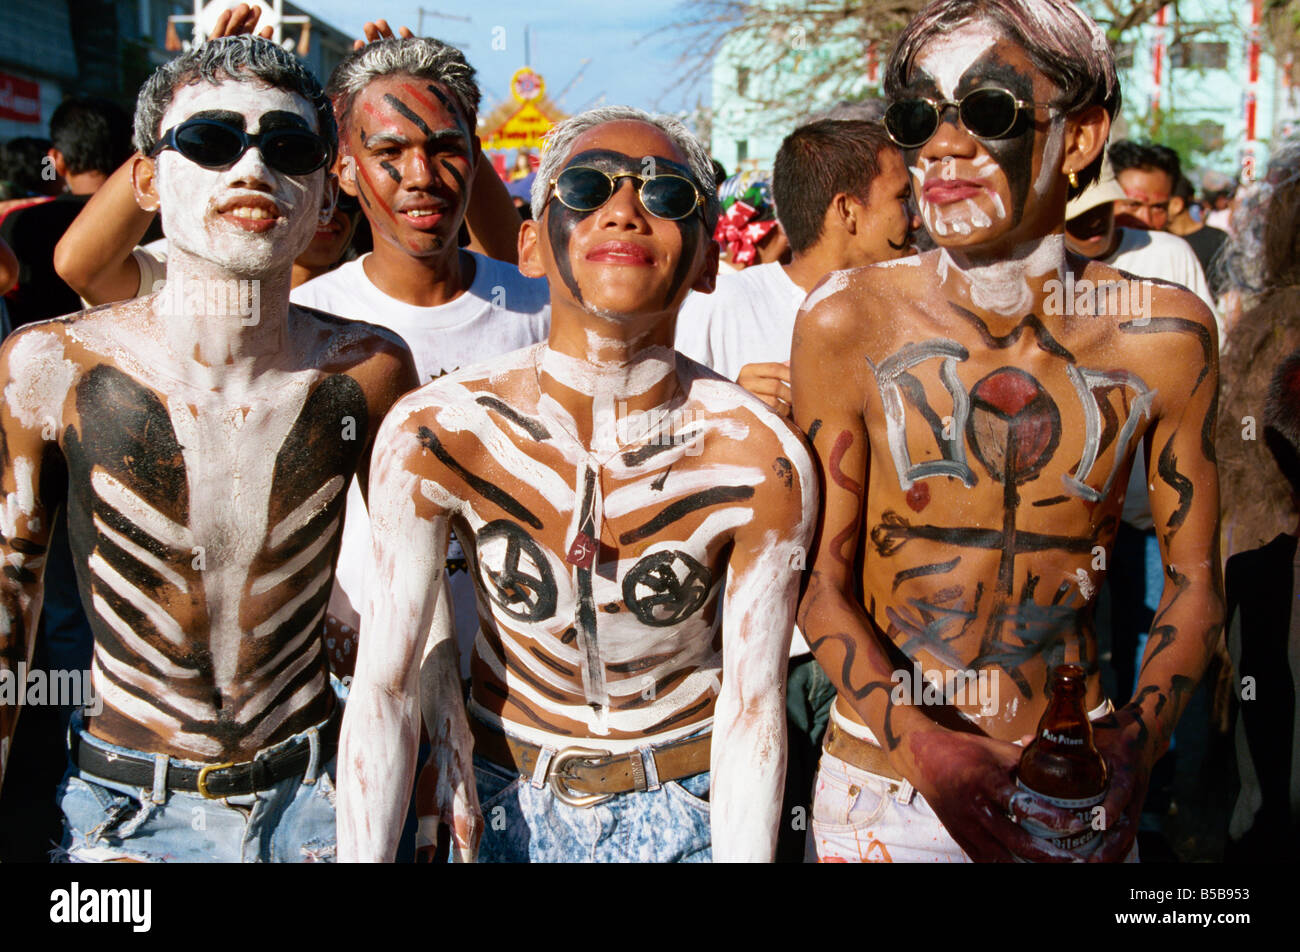 A group of men with body decoration and sunglasses during the Mardi Gras Ati Atihan at Kalico on Panay Island Philippines Asia Stock Photo